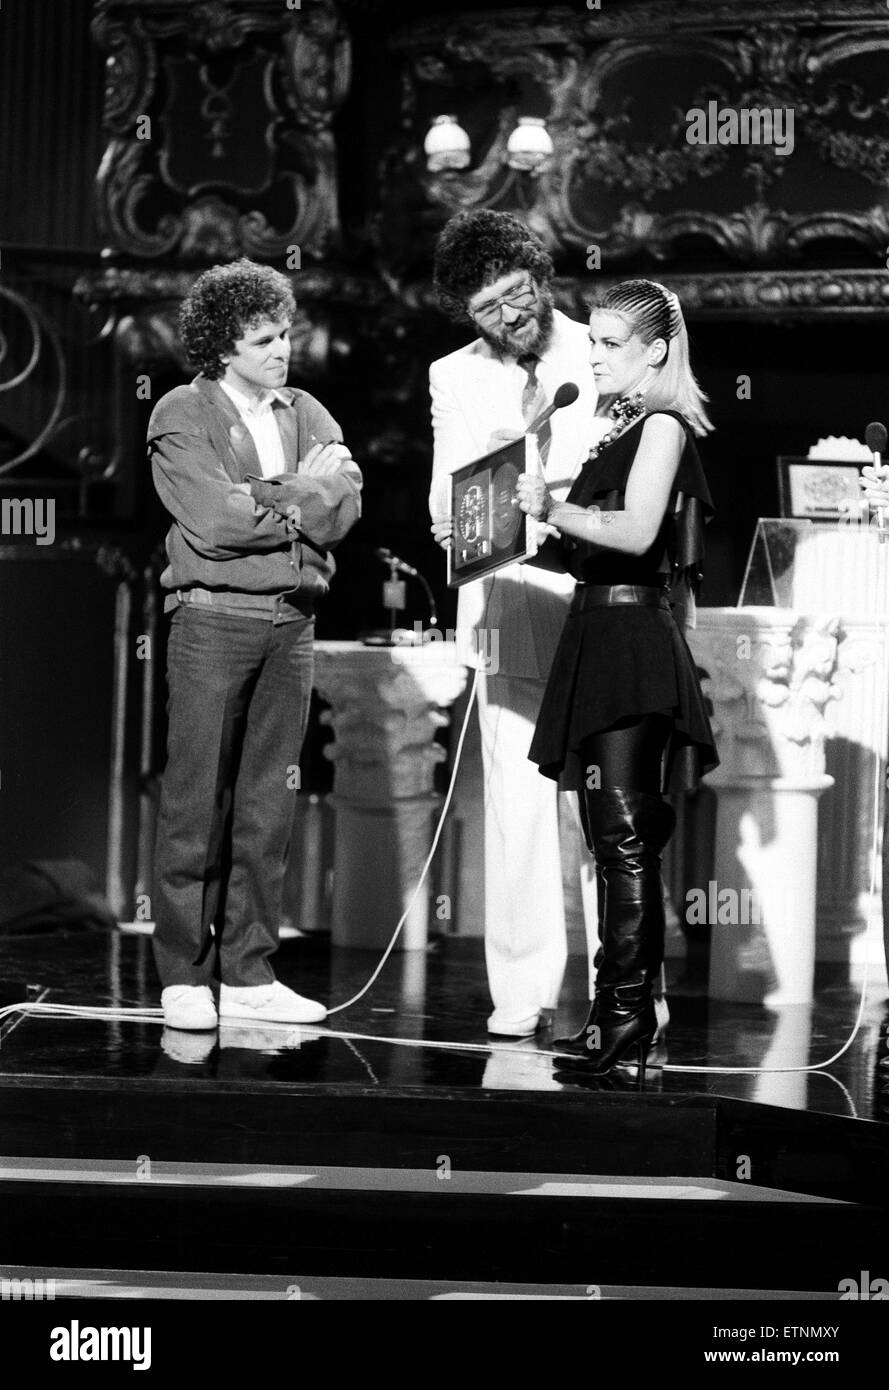 Daily Mirror British Rock & Pop Awards at The Lyceum, London. Toyah Willcox receiving 'Best Female Singer of 1981' award. Pictured on stage with Leo Sayer and Dave Lee Travis. 23rd February 1982. Stock Photo